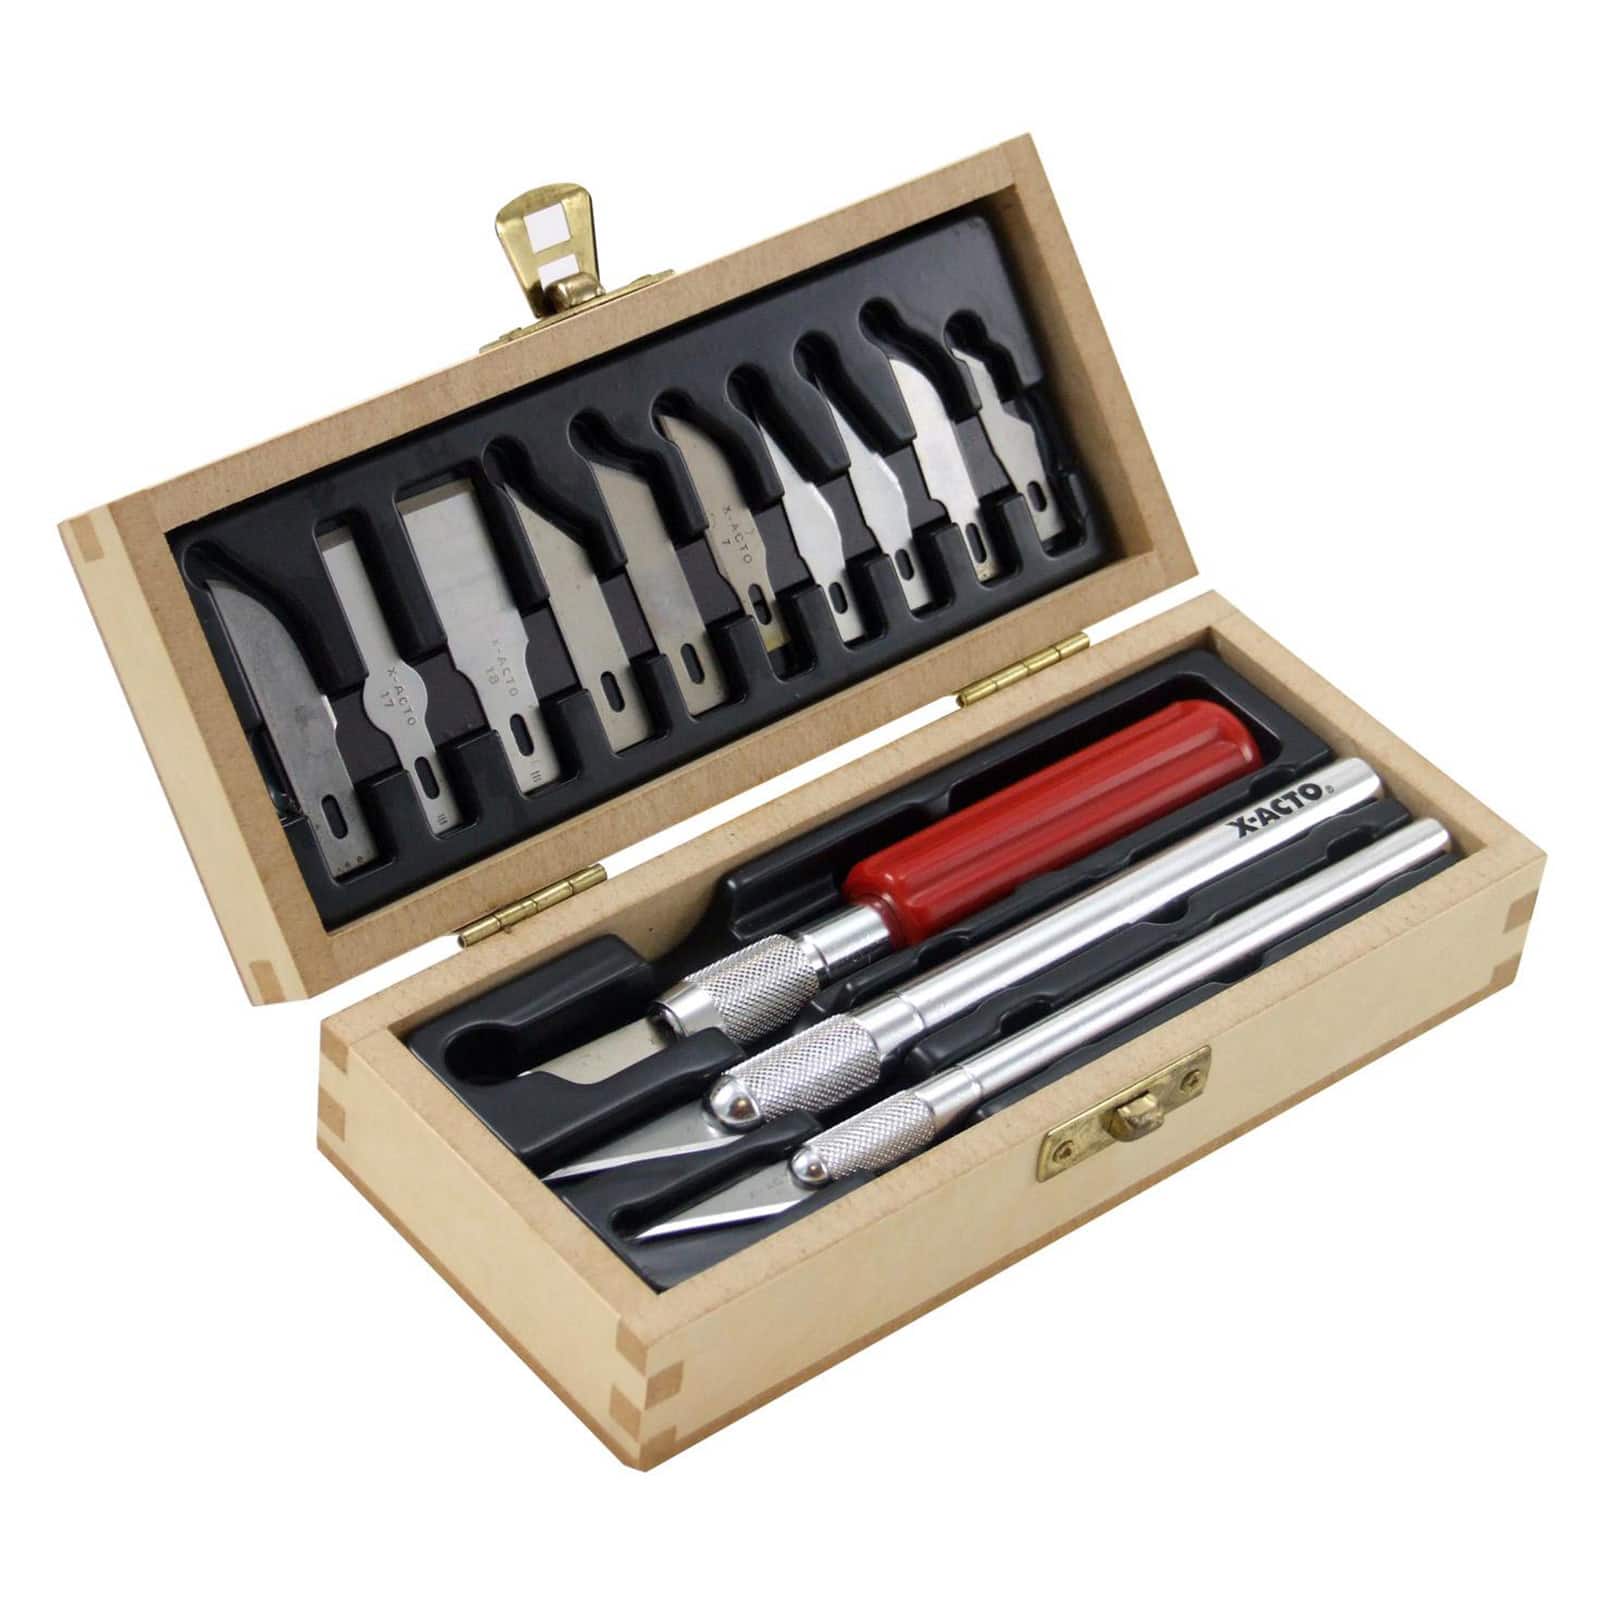 X-acto Knife Set Tray, with optional pegboard mounts by Blackcrow, Download free STL model